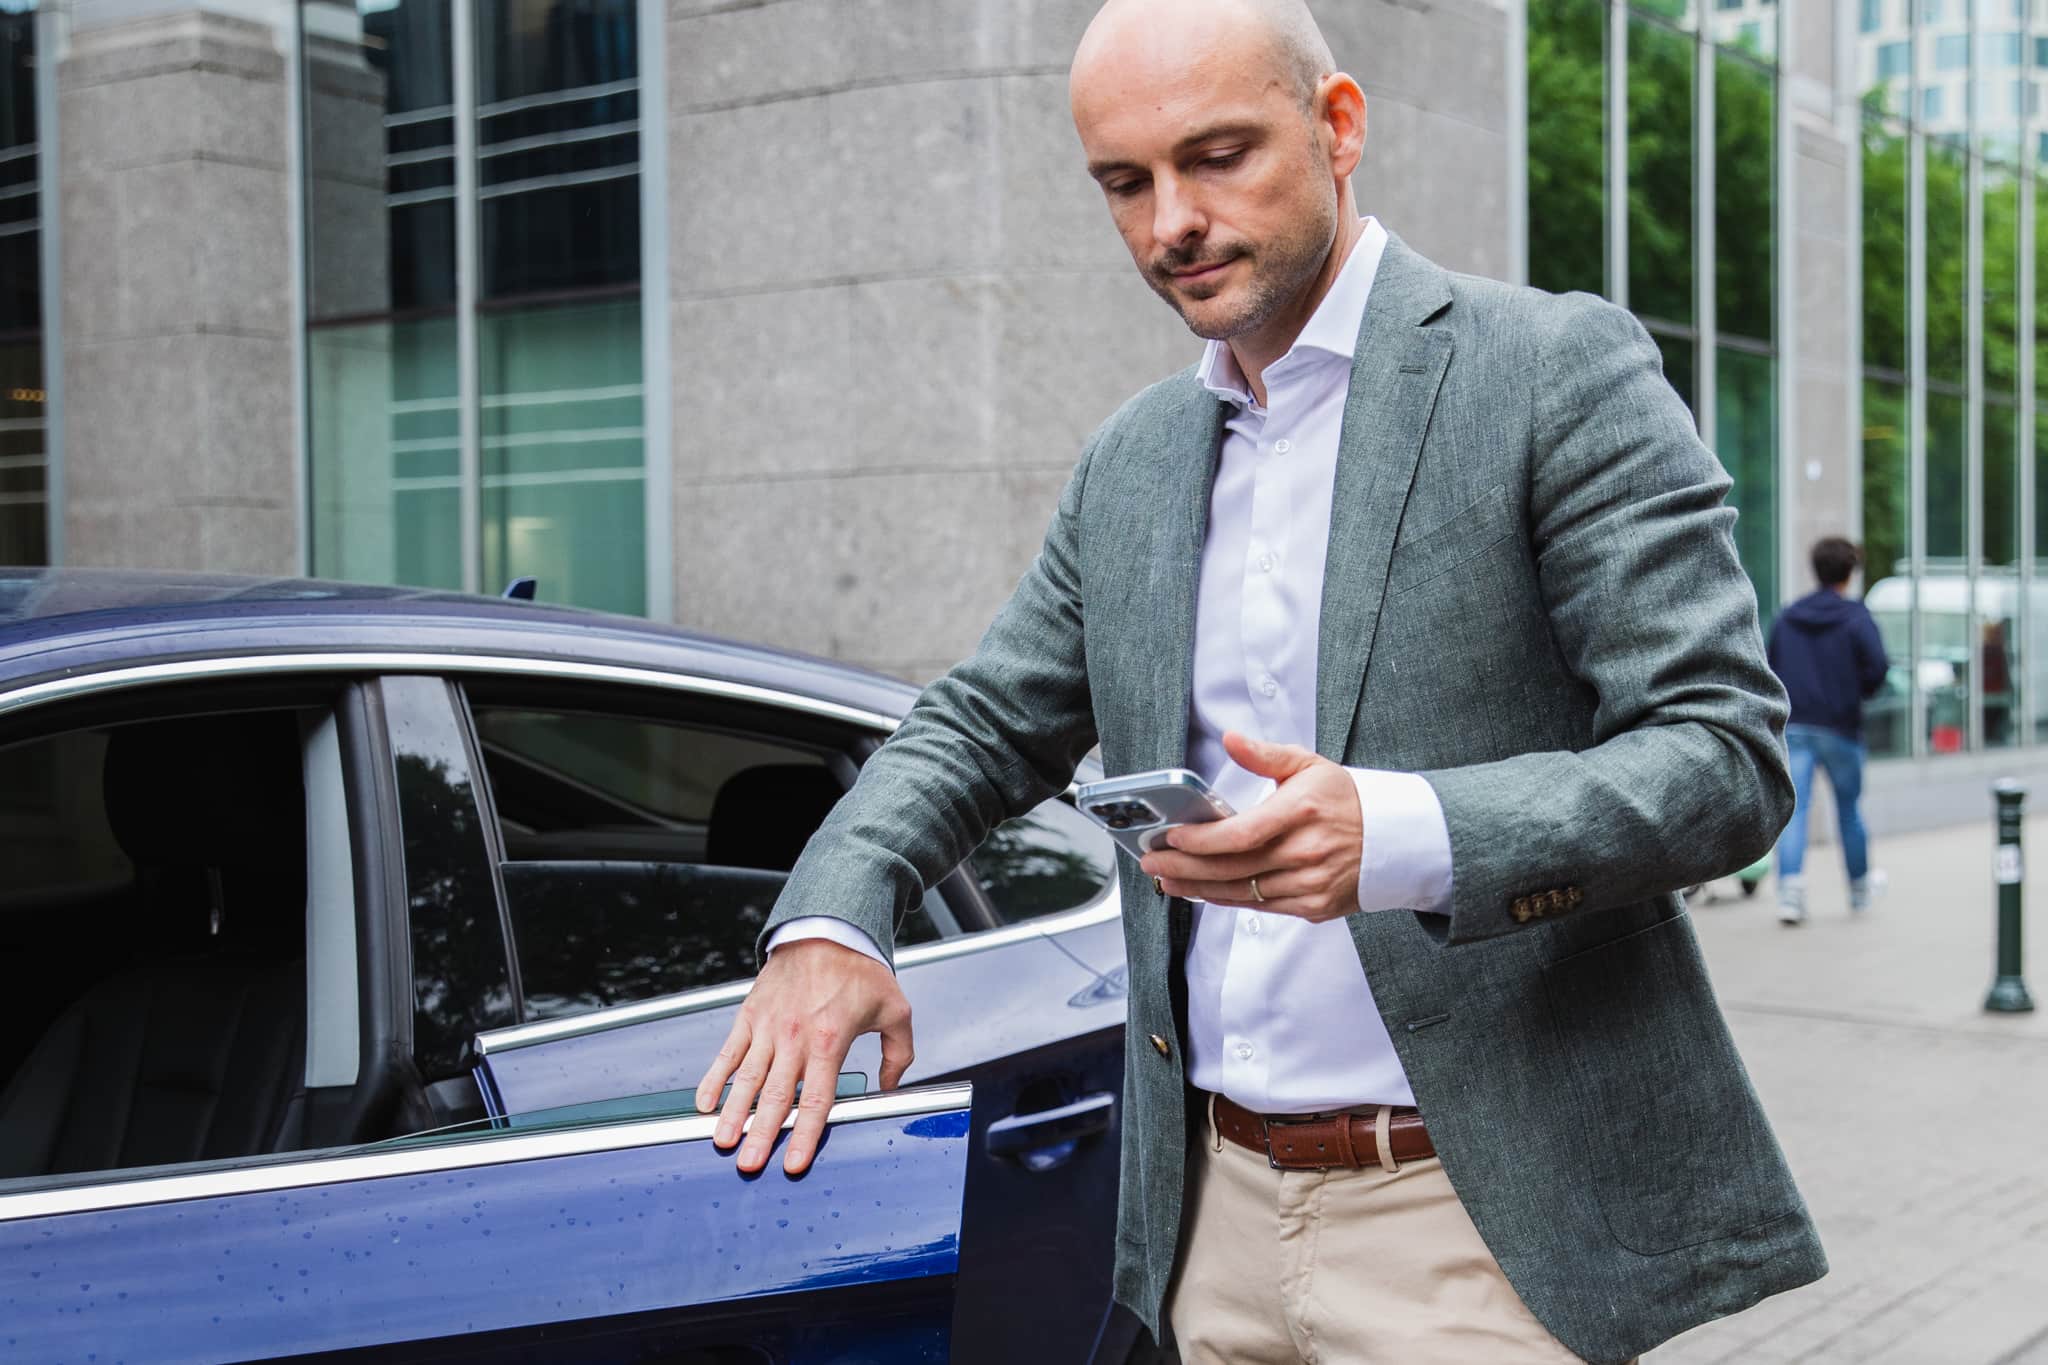 Man getting out of car to submit his milage allowance on his phone 